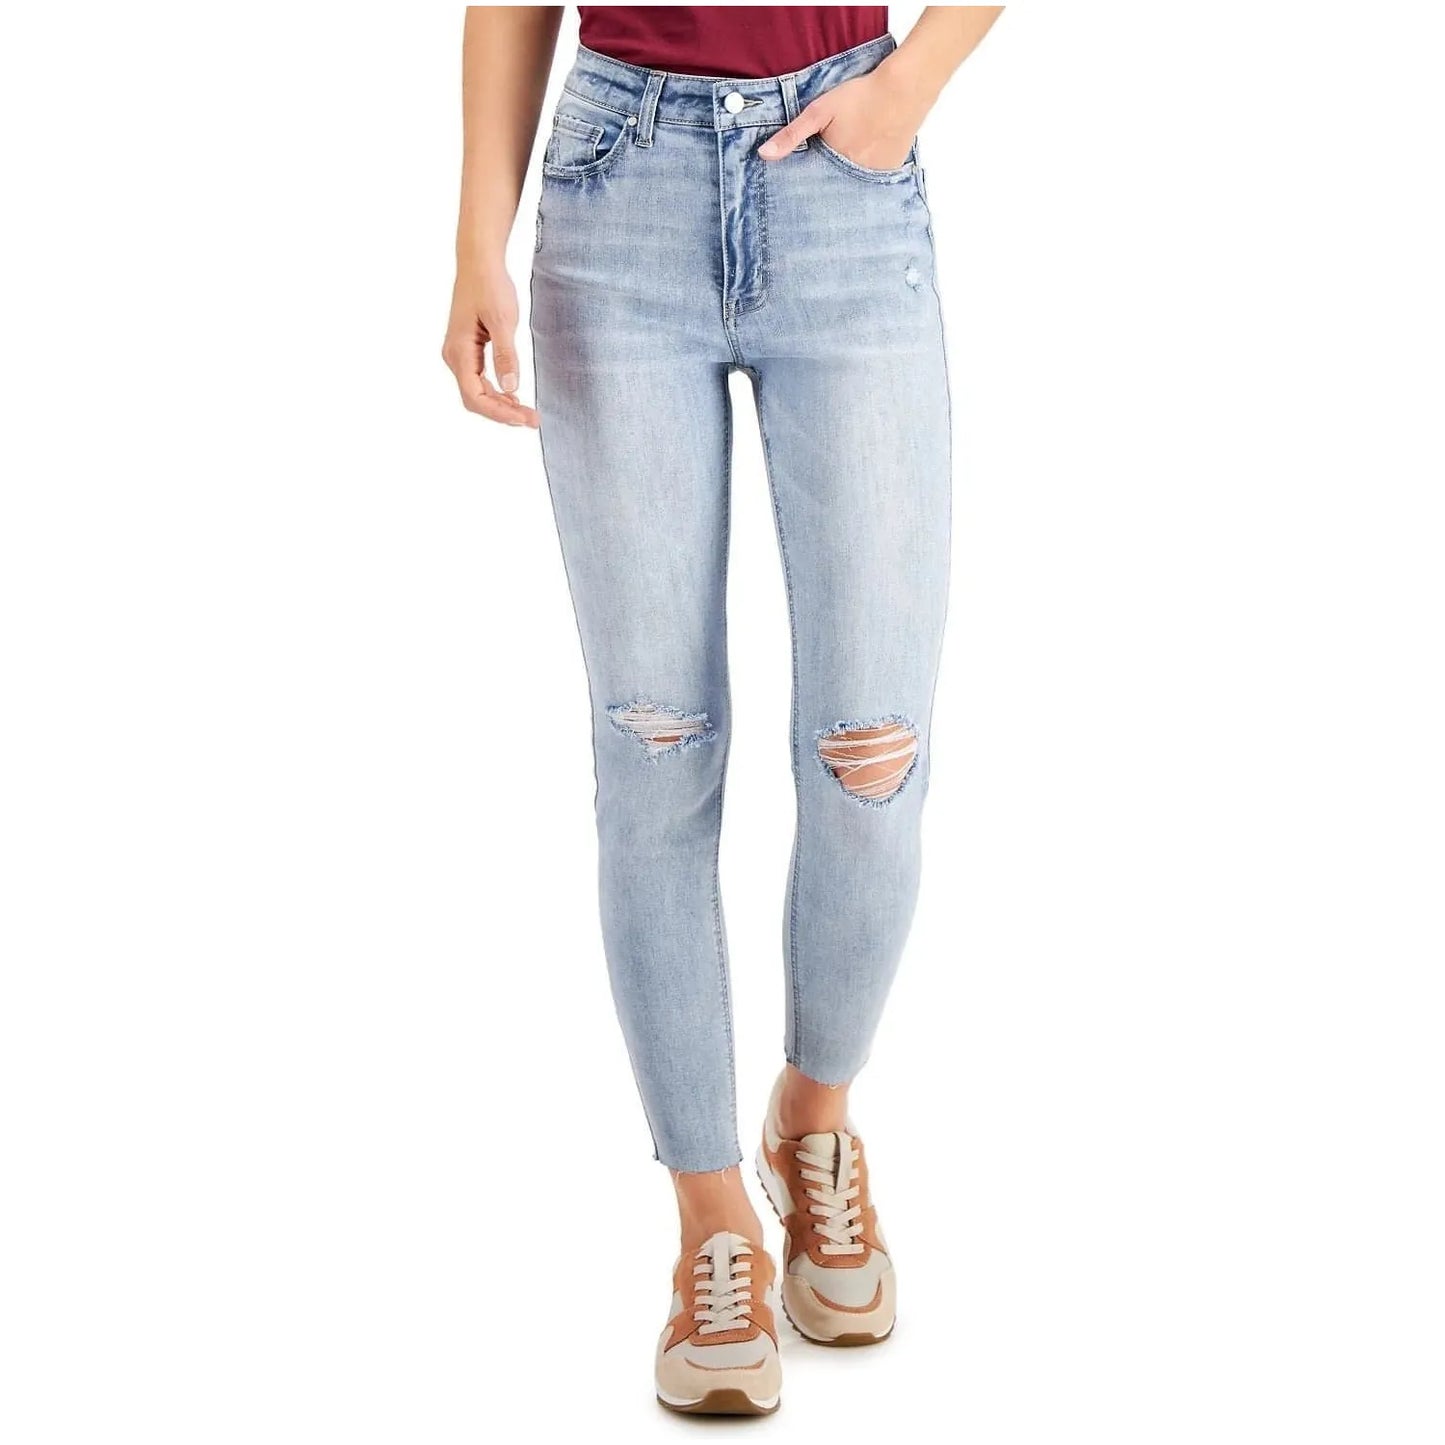 Tinseltown High Rise Skinny Jeans, Blue, Size: 3 - Brandat Outlet